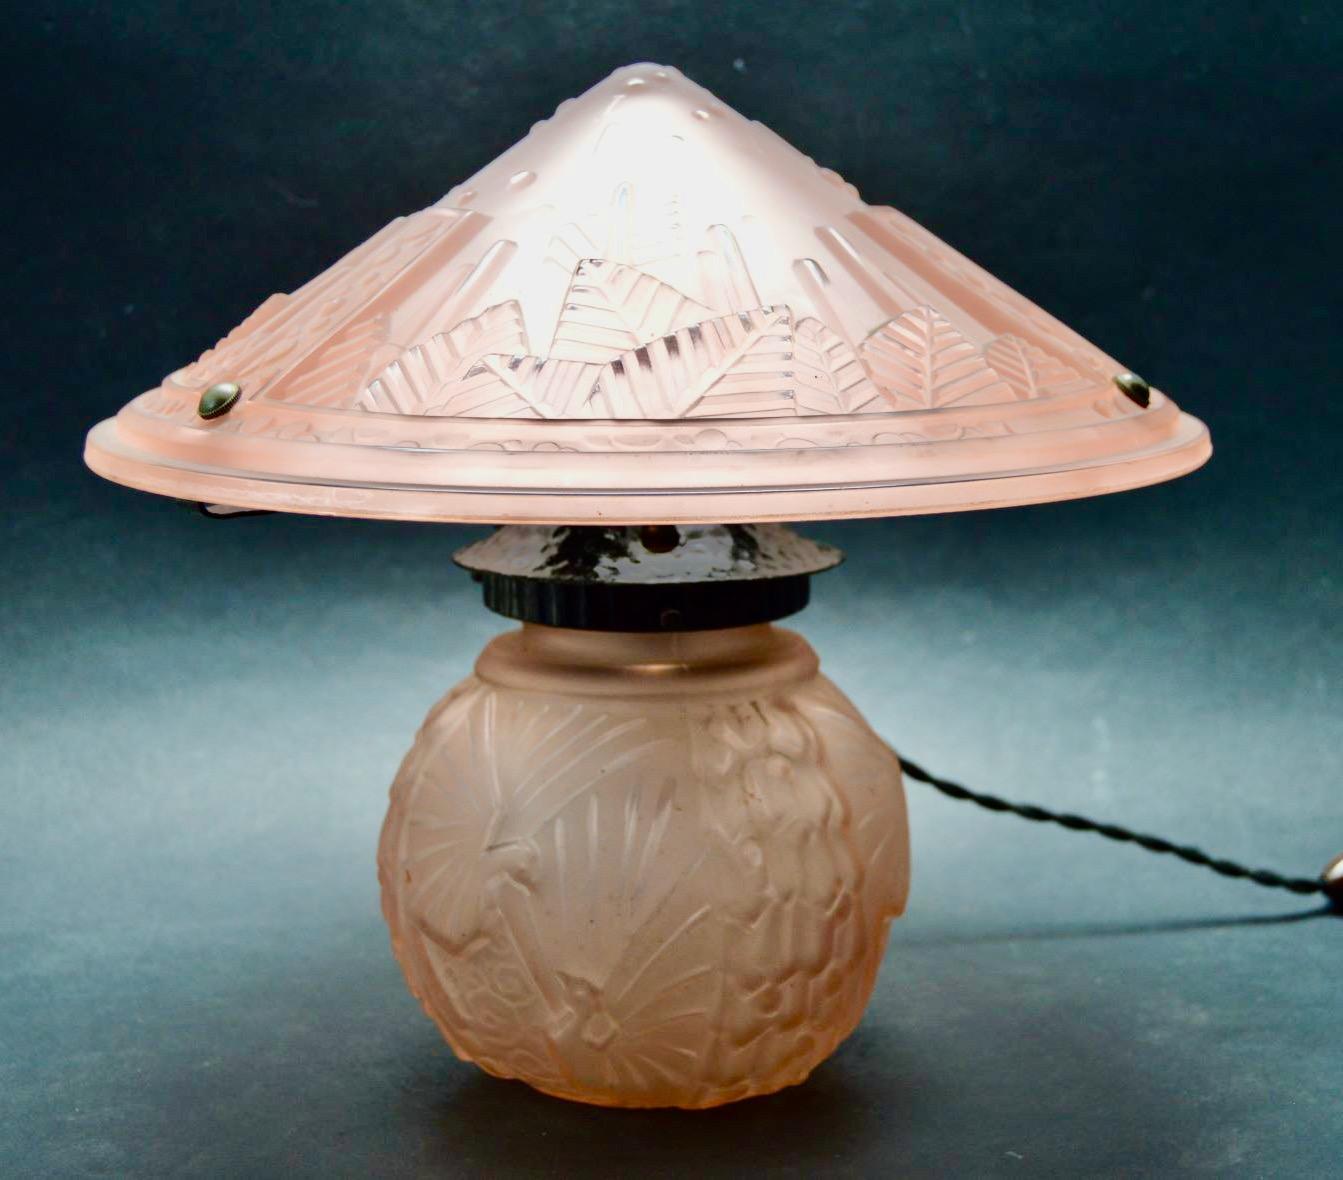 Pink Muller Freres Luneville 2 piece mushroom salmon color glass lamp. Pressed glass representing the classic Muller Freres light designs. This particular rare lamp is in excellent condition representing the state of this art form from the 1930s. We